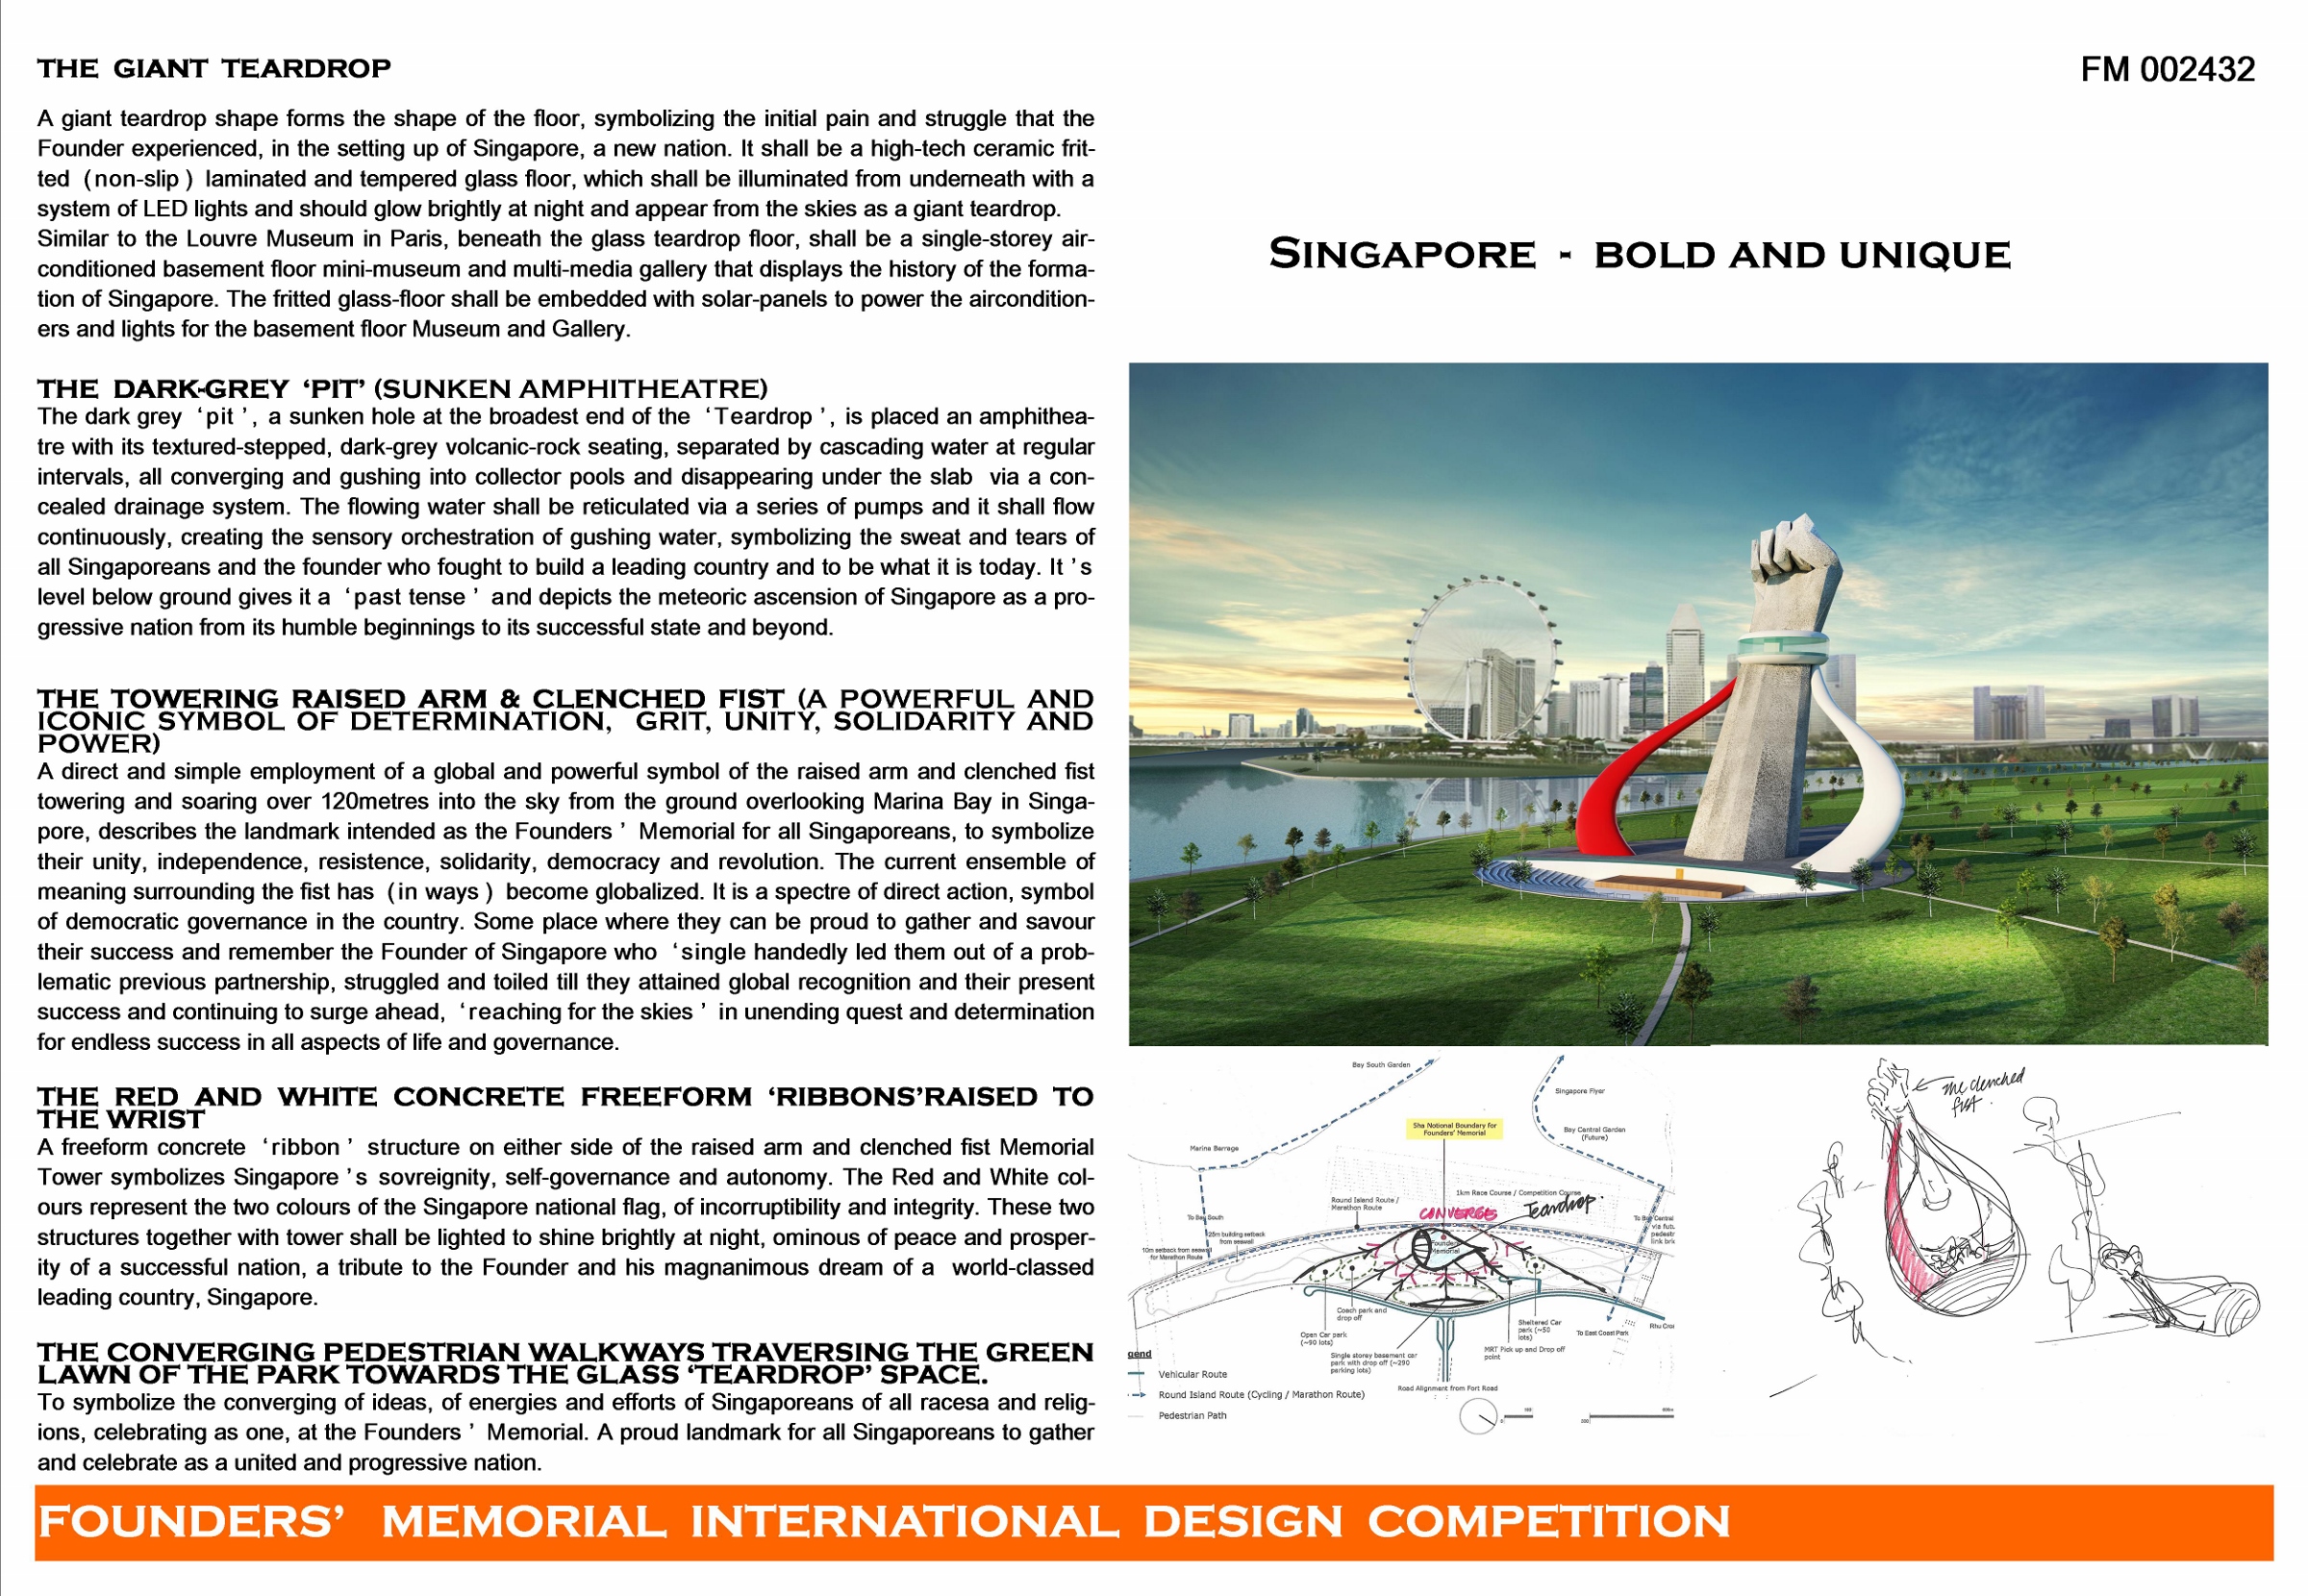 design competition placeholder